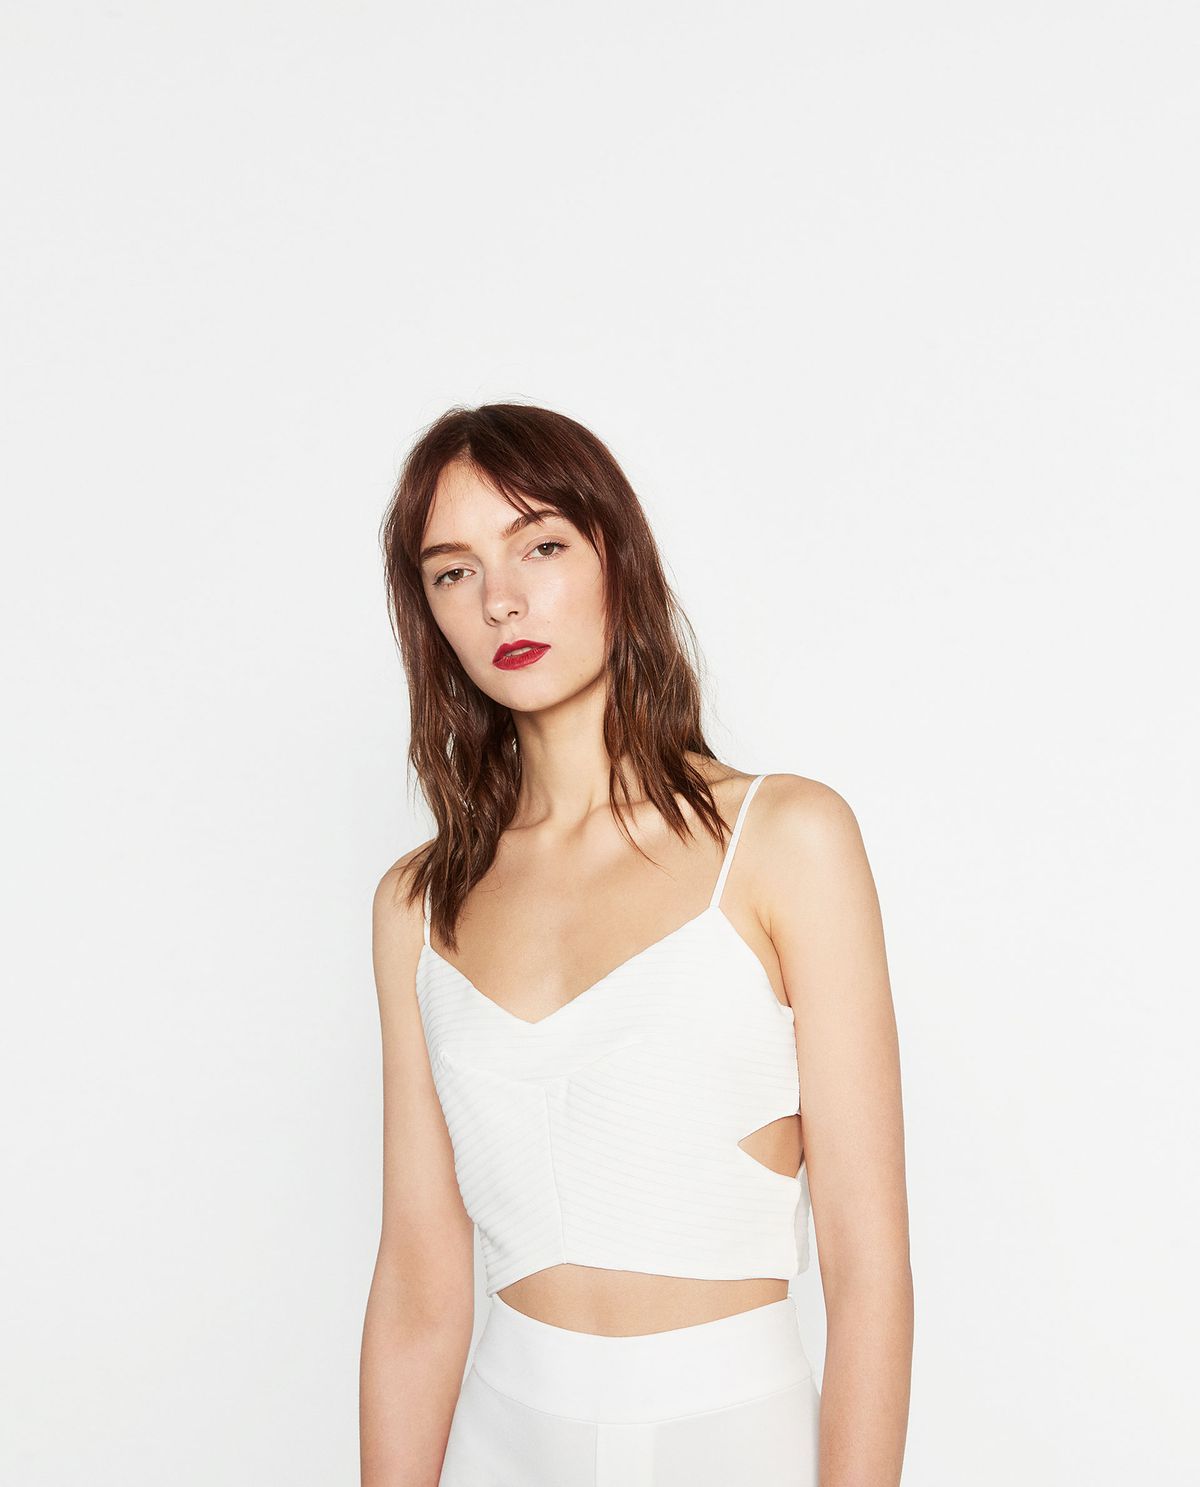 A model in a white crop top with side cutouts